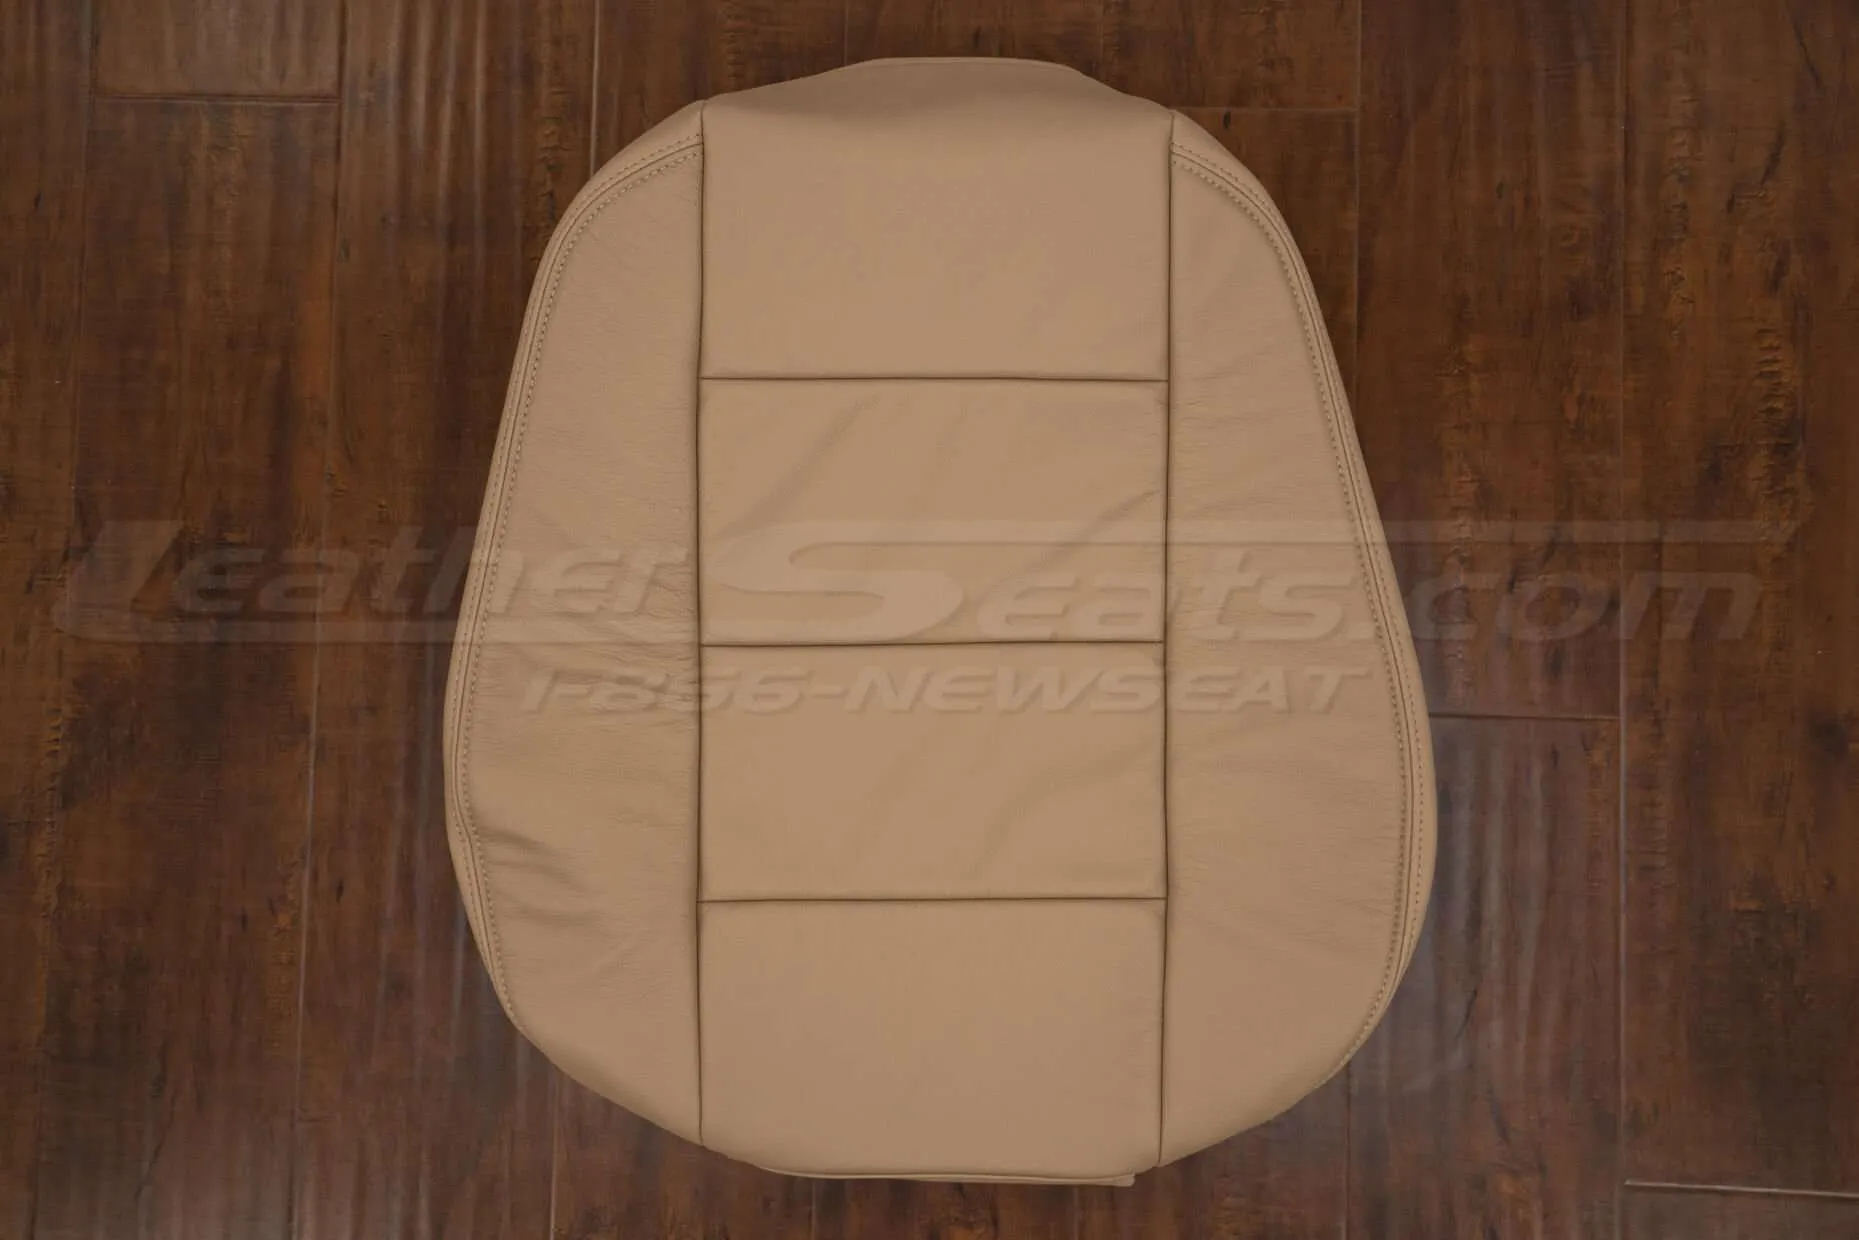 BMW 3 Series front backrest upholstery in Bisque